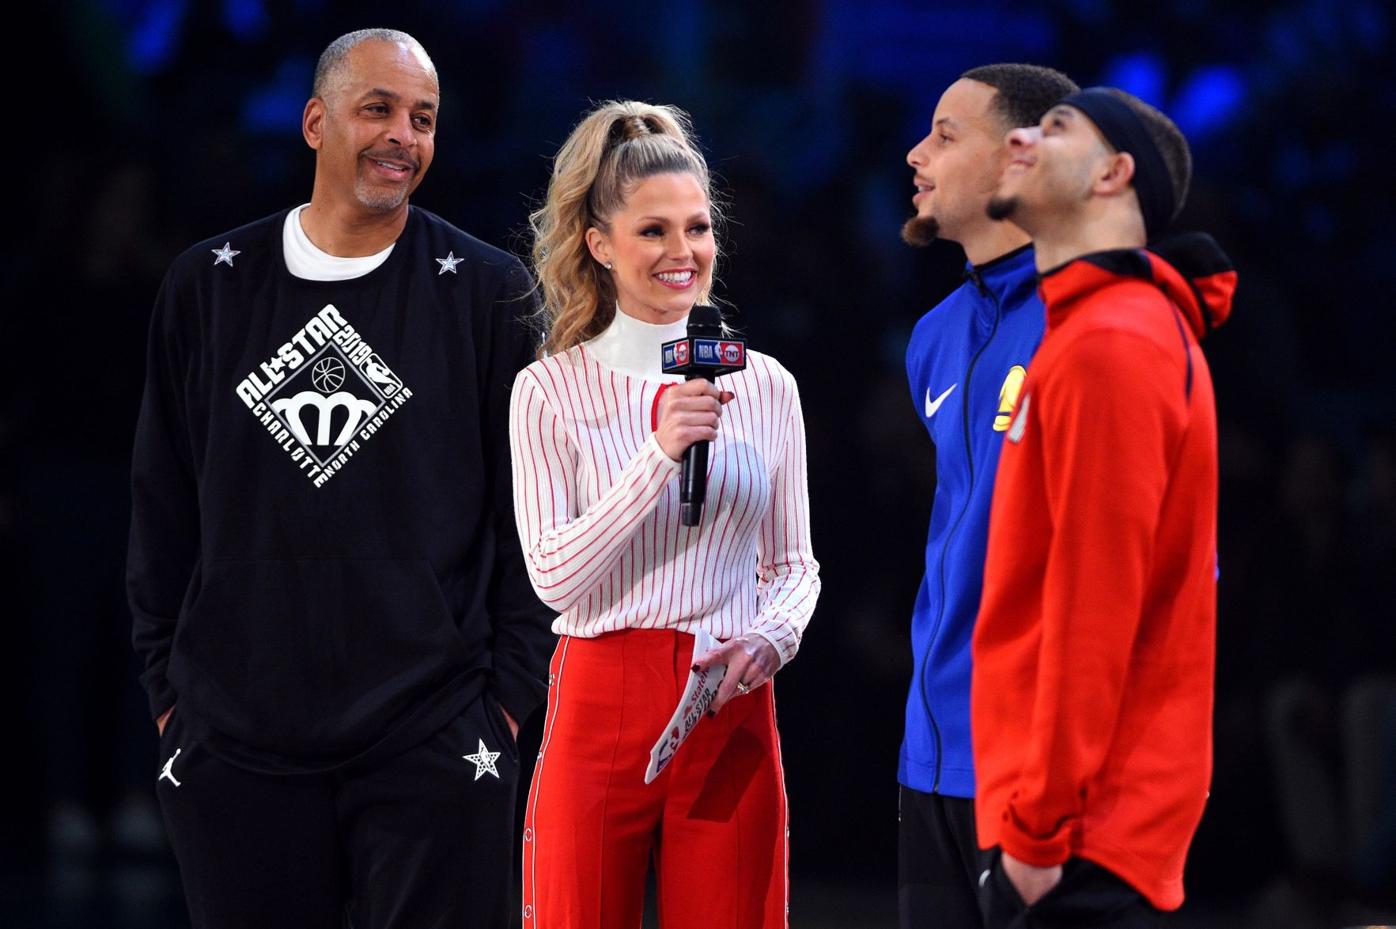 Dell and Sonya Curry will flip a coin to see what son they root